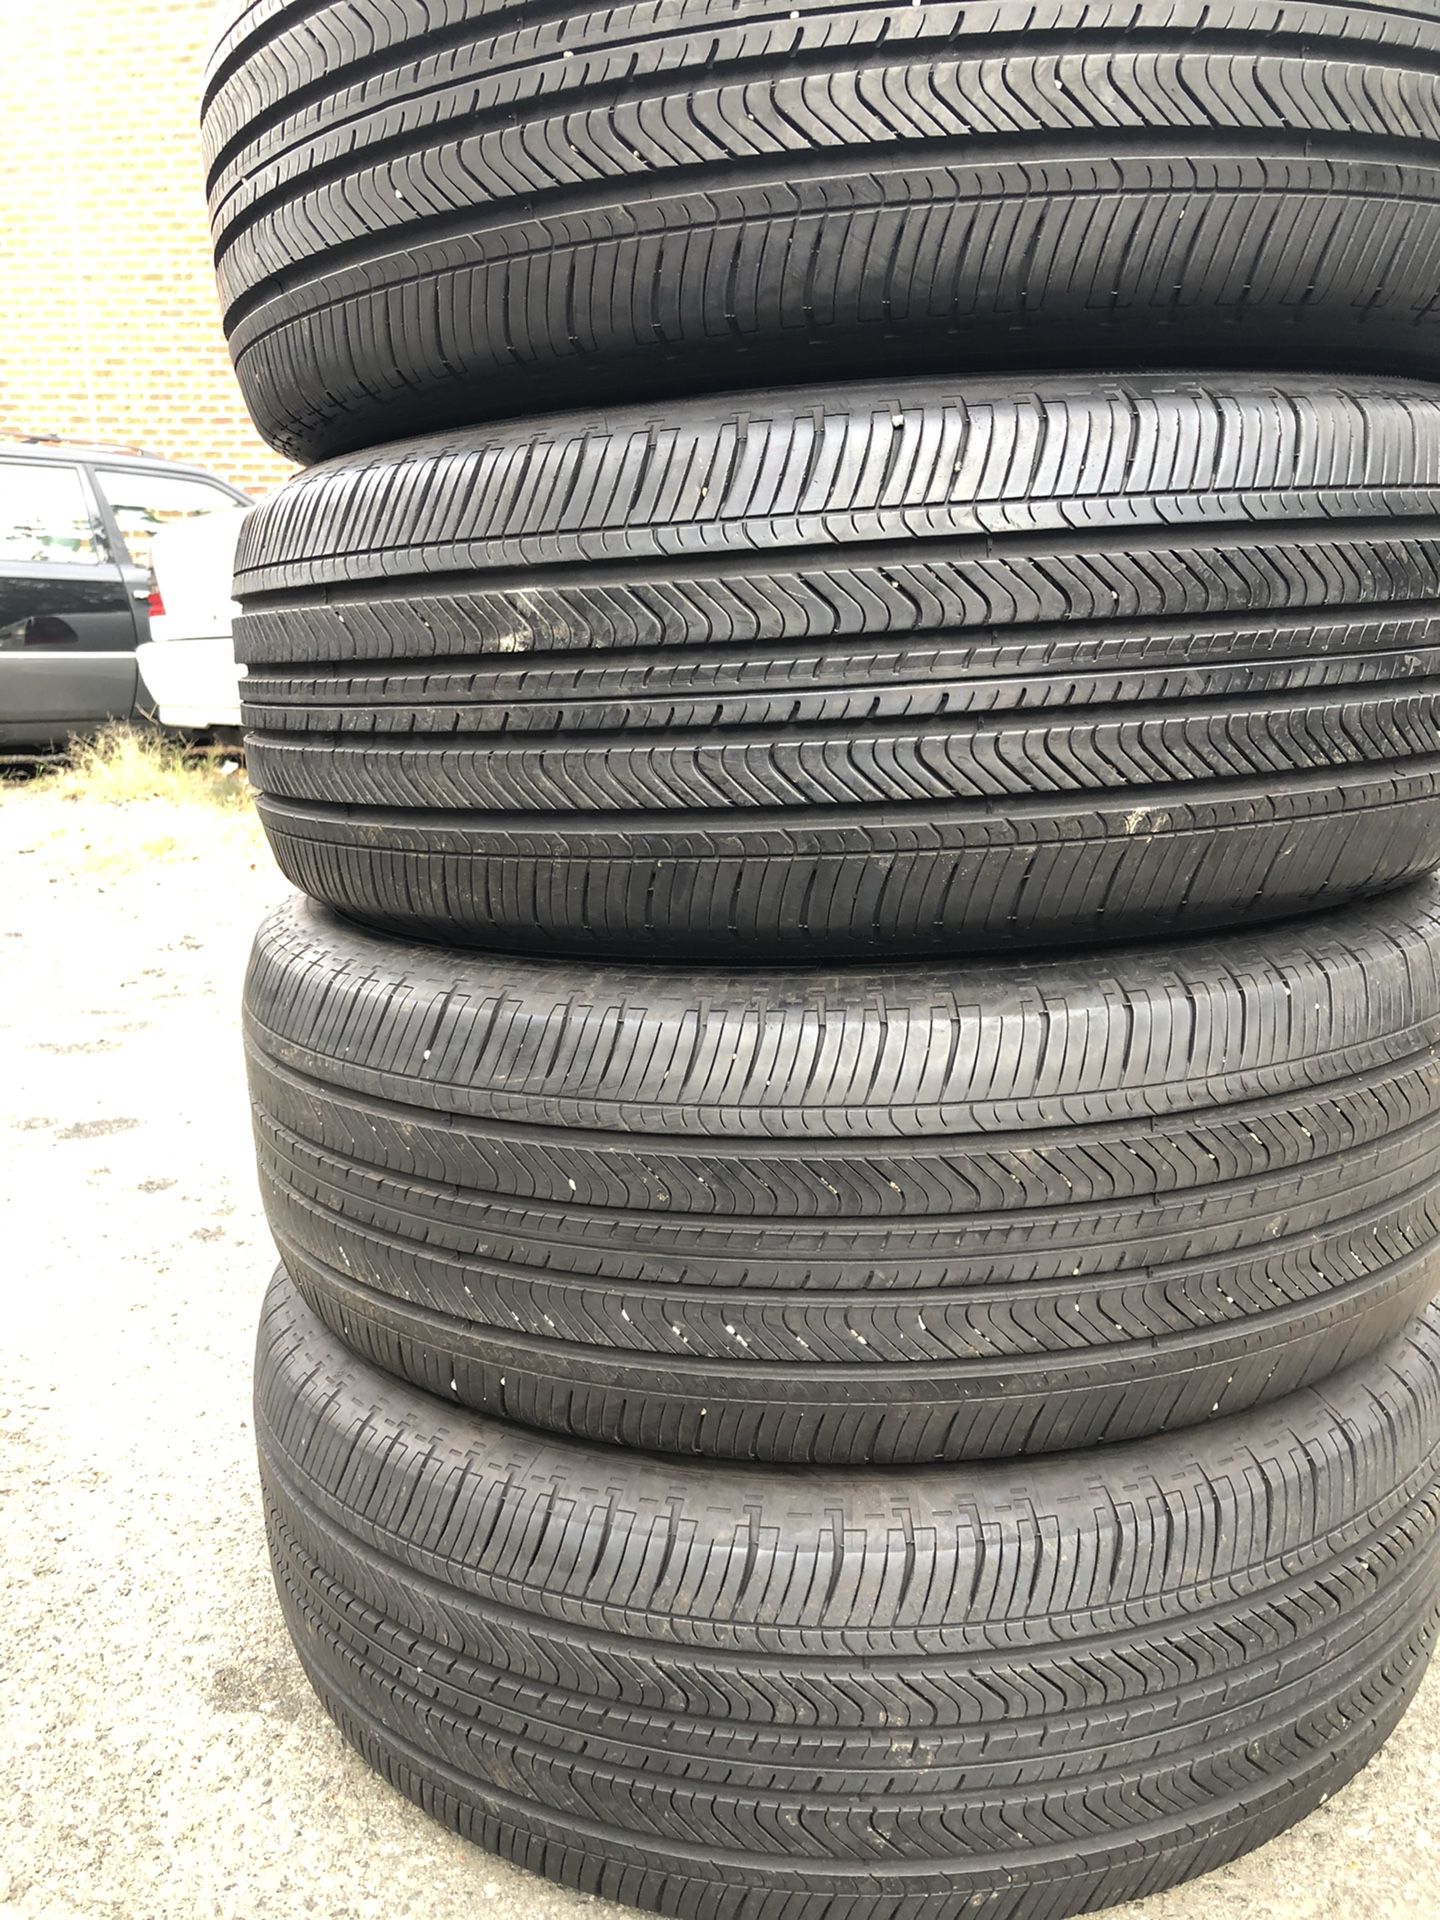 Set 4 usted tire 235/60R18 MICHELIN PRIMACY MXV4 three have patch set 4 used tire $180 4 llantas usadas 235/60R18 MICHELIN PRIMACY MXV4 3 tienen parc